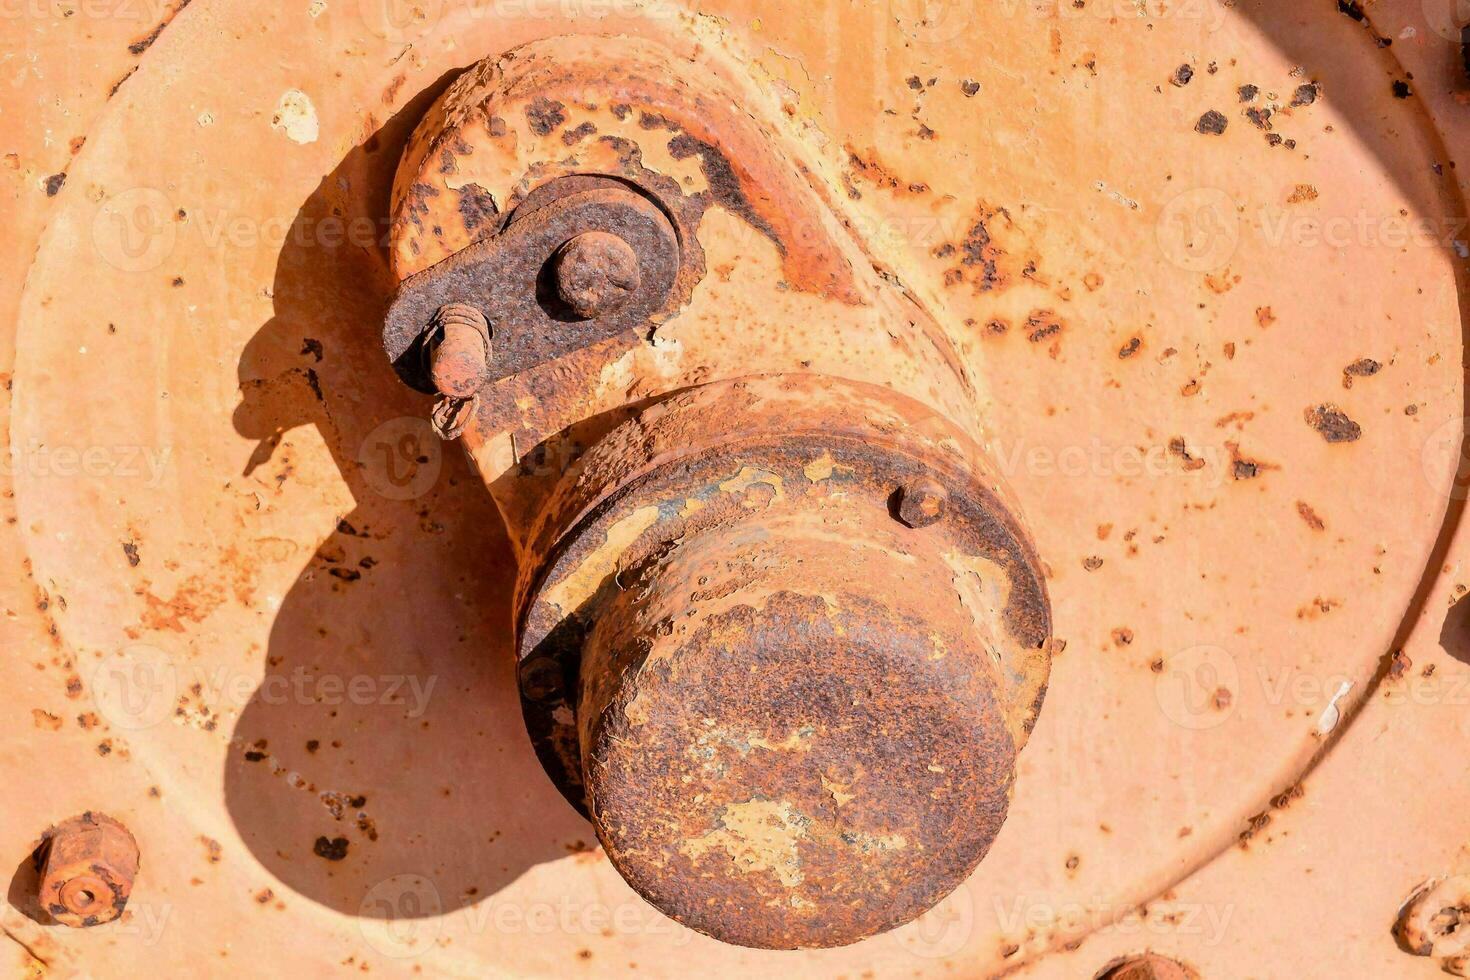 a rusty old metal object with a handle photo